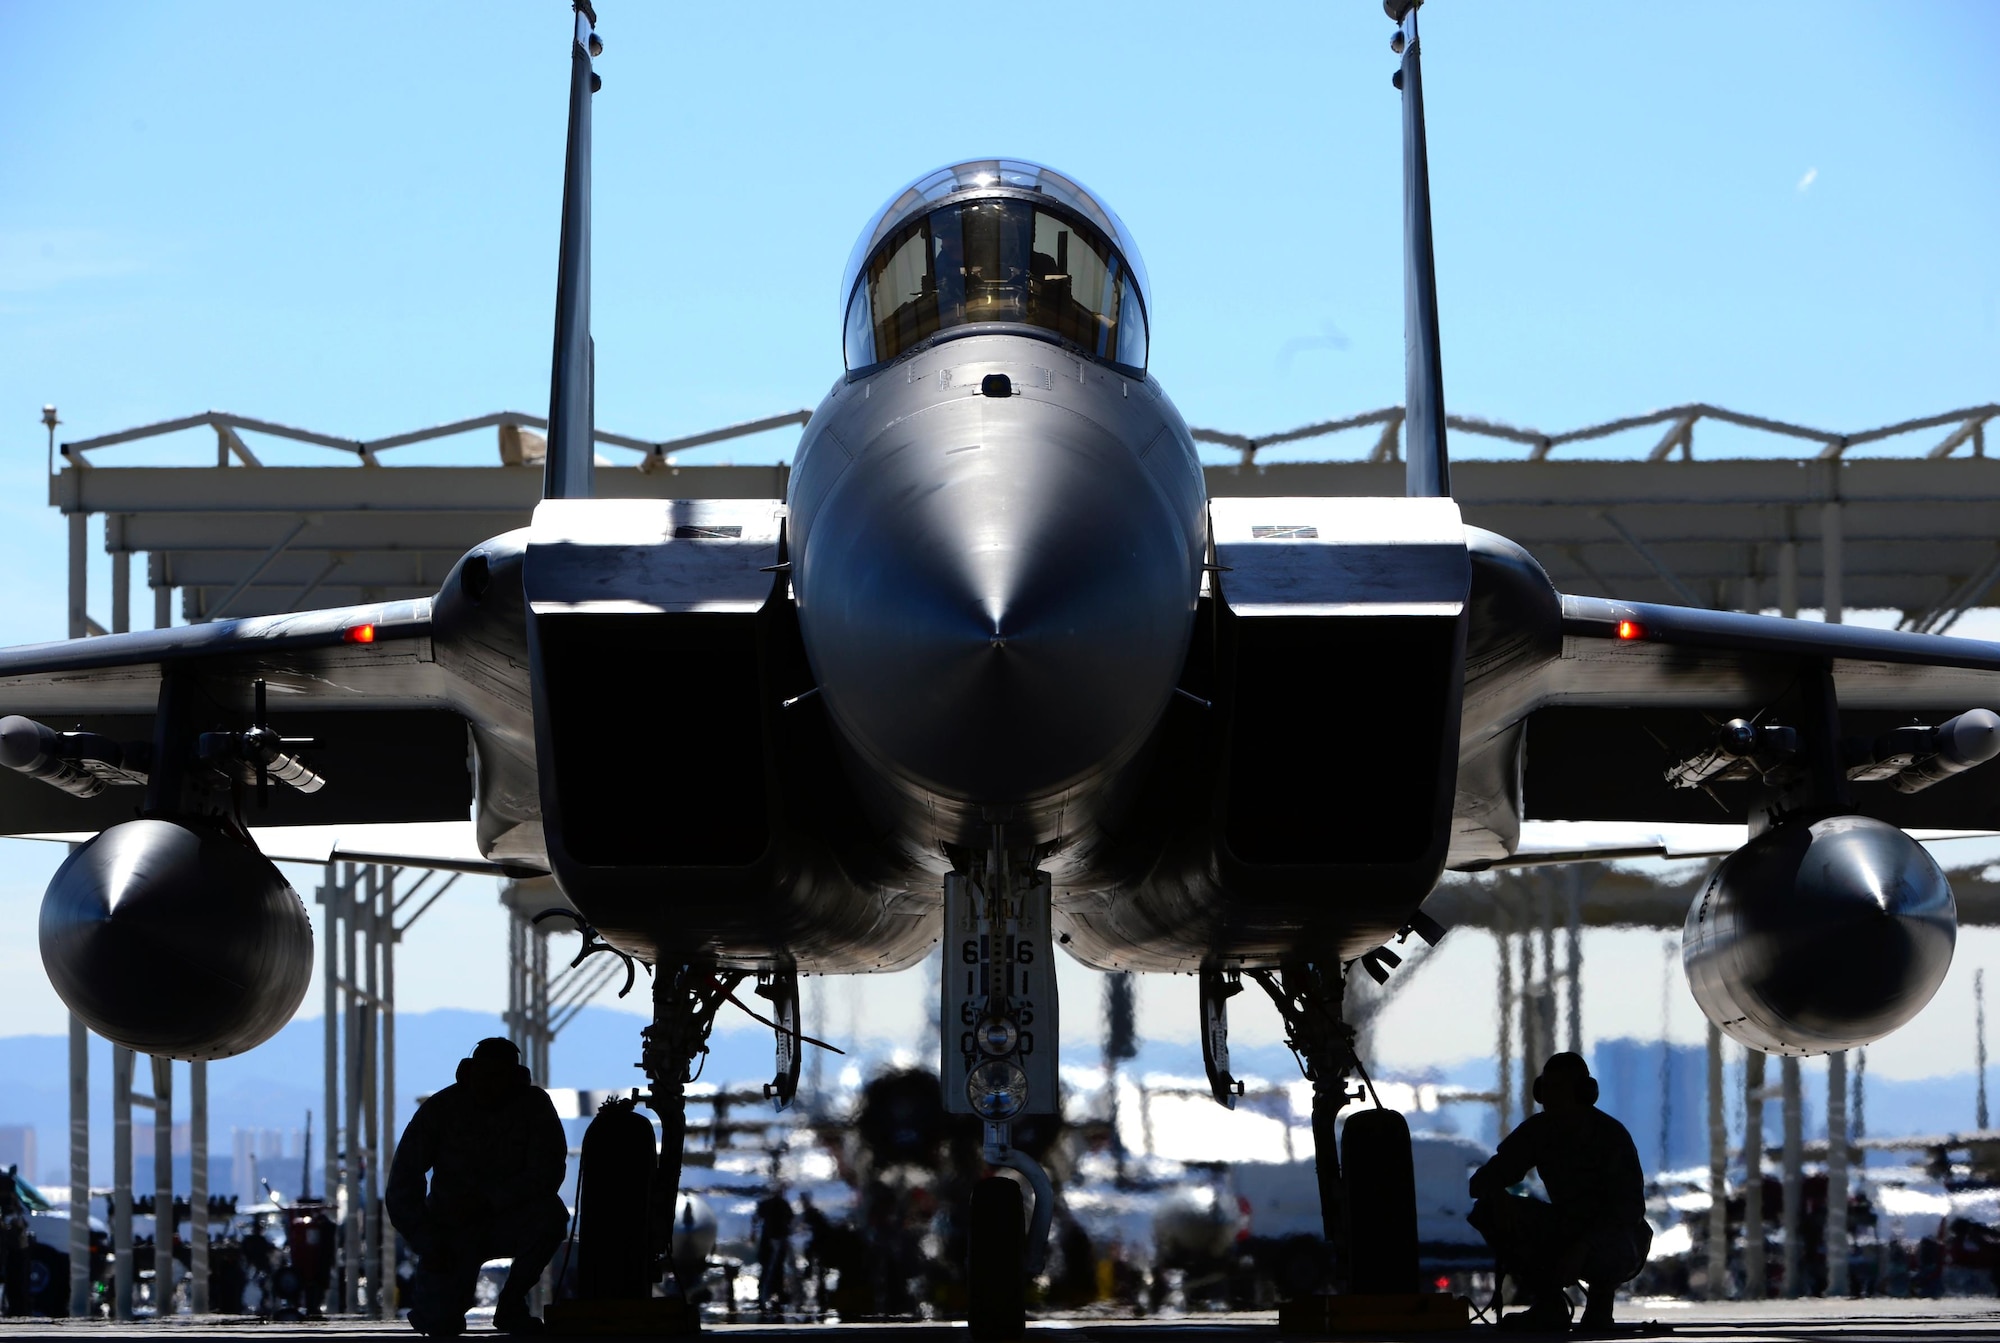 An F-15C Eagle assigned to the 493rd Fighter Squadron, Royal Air Force Lakenheath, England, is prepared for a sortie for exercise Red Flag 17-2 at Nellis Air Force Base, Nev., Mar. 3. The exercise was designed to simulate the first 10 combat missions pilots would face and reduce risk during their first real world missions due to lack of experience. (U.S. Air Force photo/Senior Airman Malcolm Mayfield)